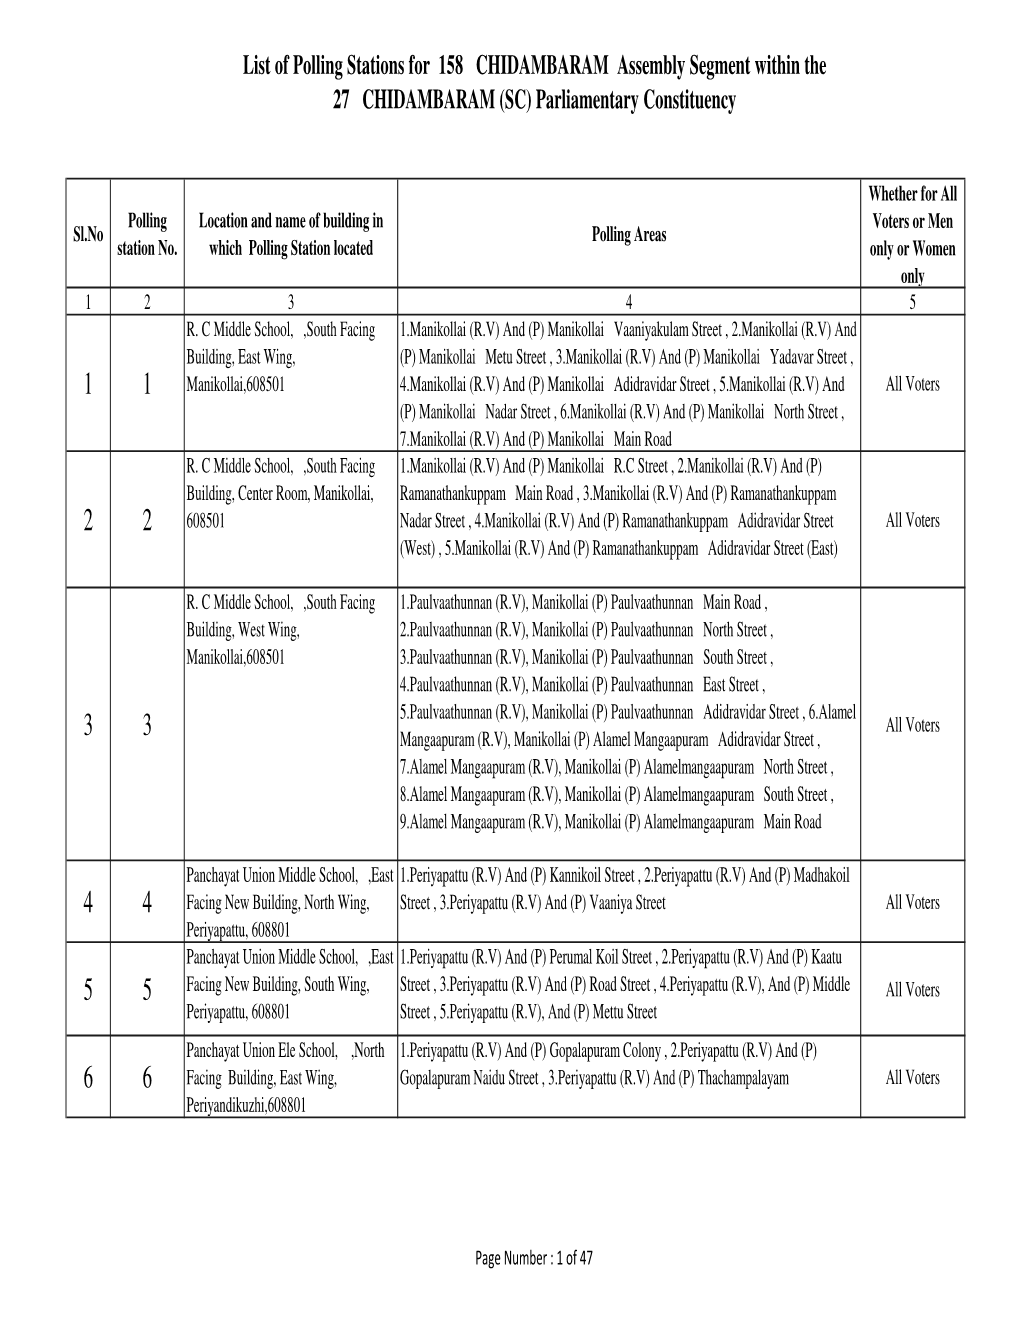 List of Polling Stations for 158 CHIDAMBARAM Assembly Segment Within the 27 CHIDAMBARAM (SC) Parliamentary Constituency